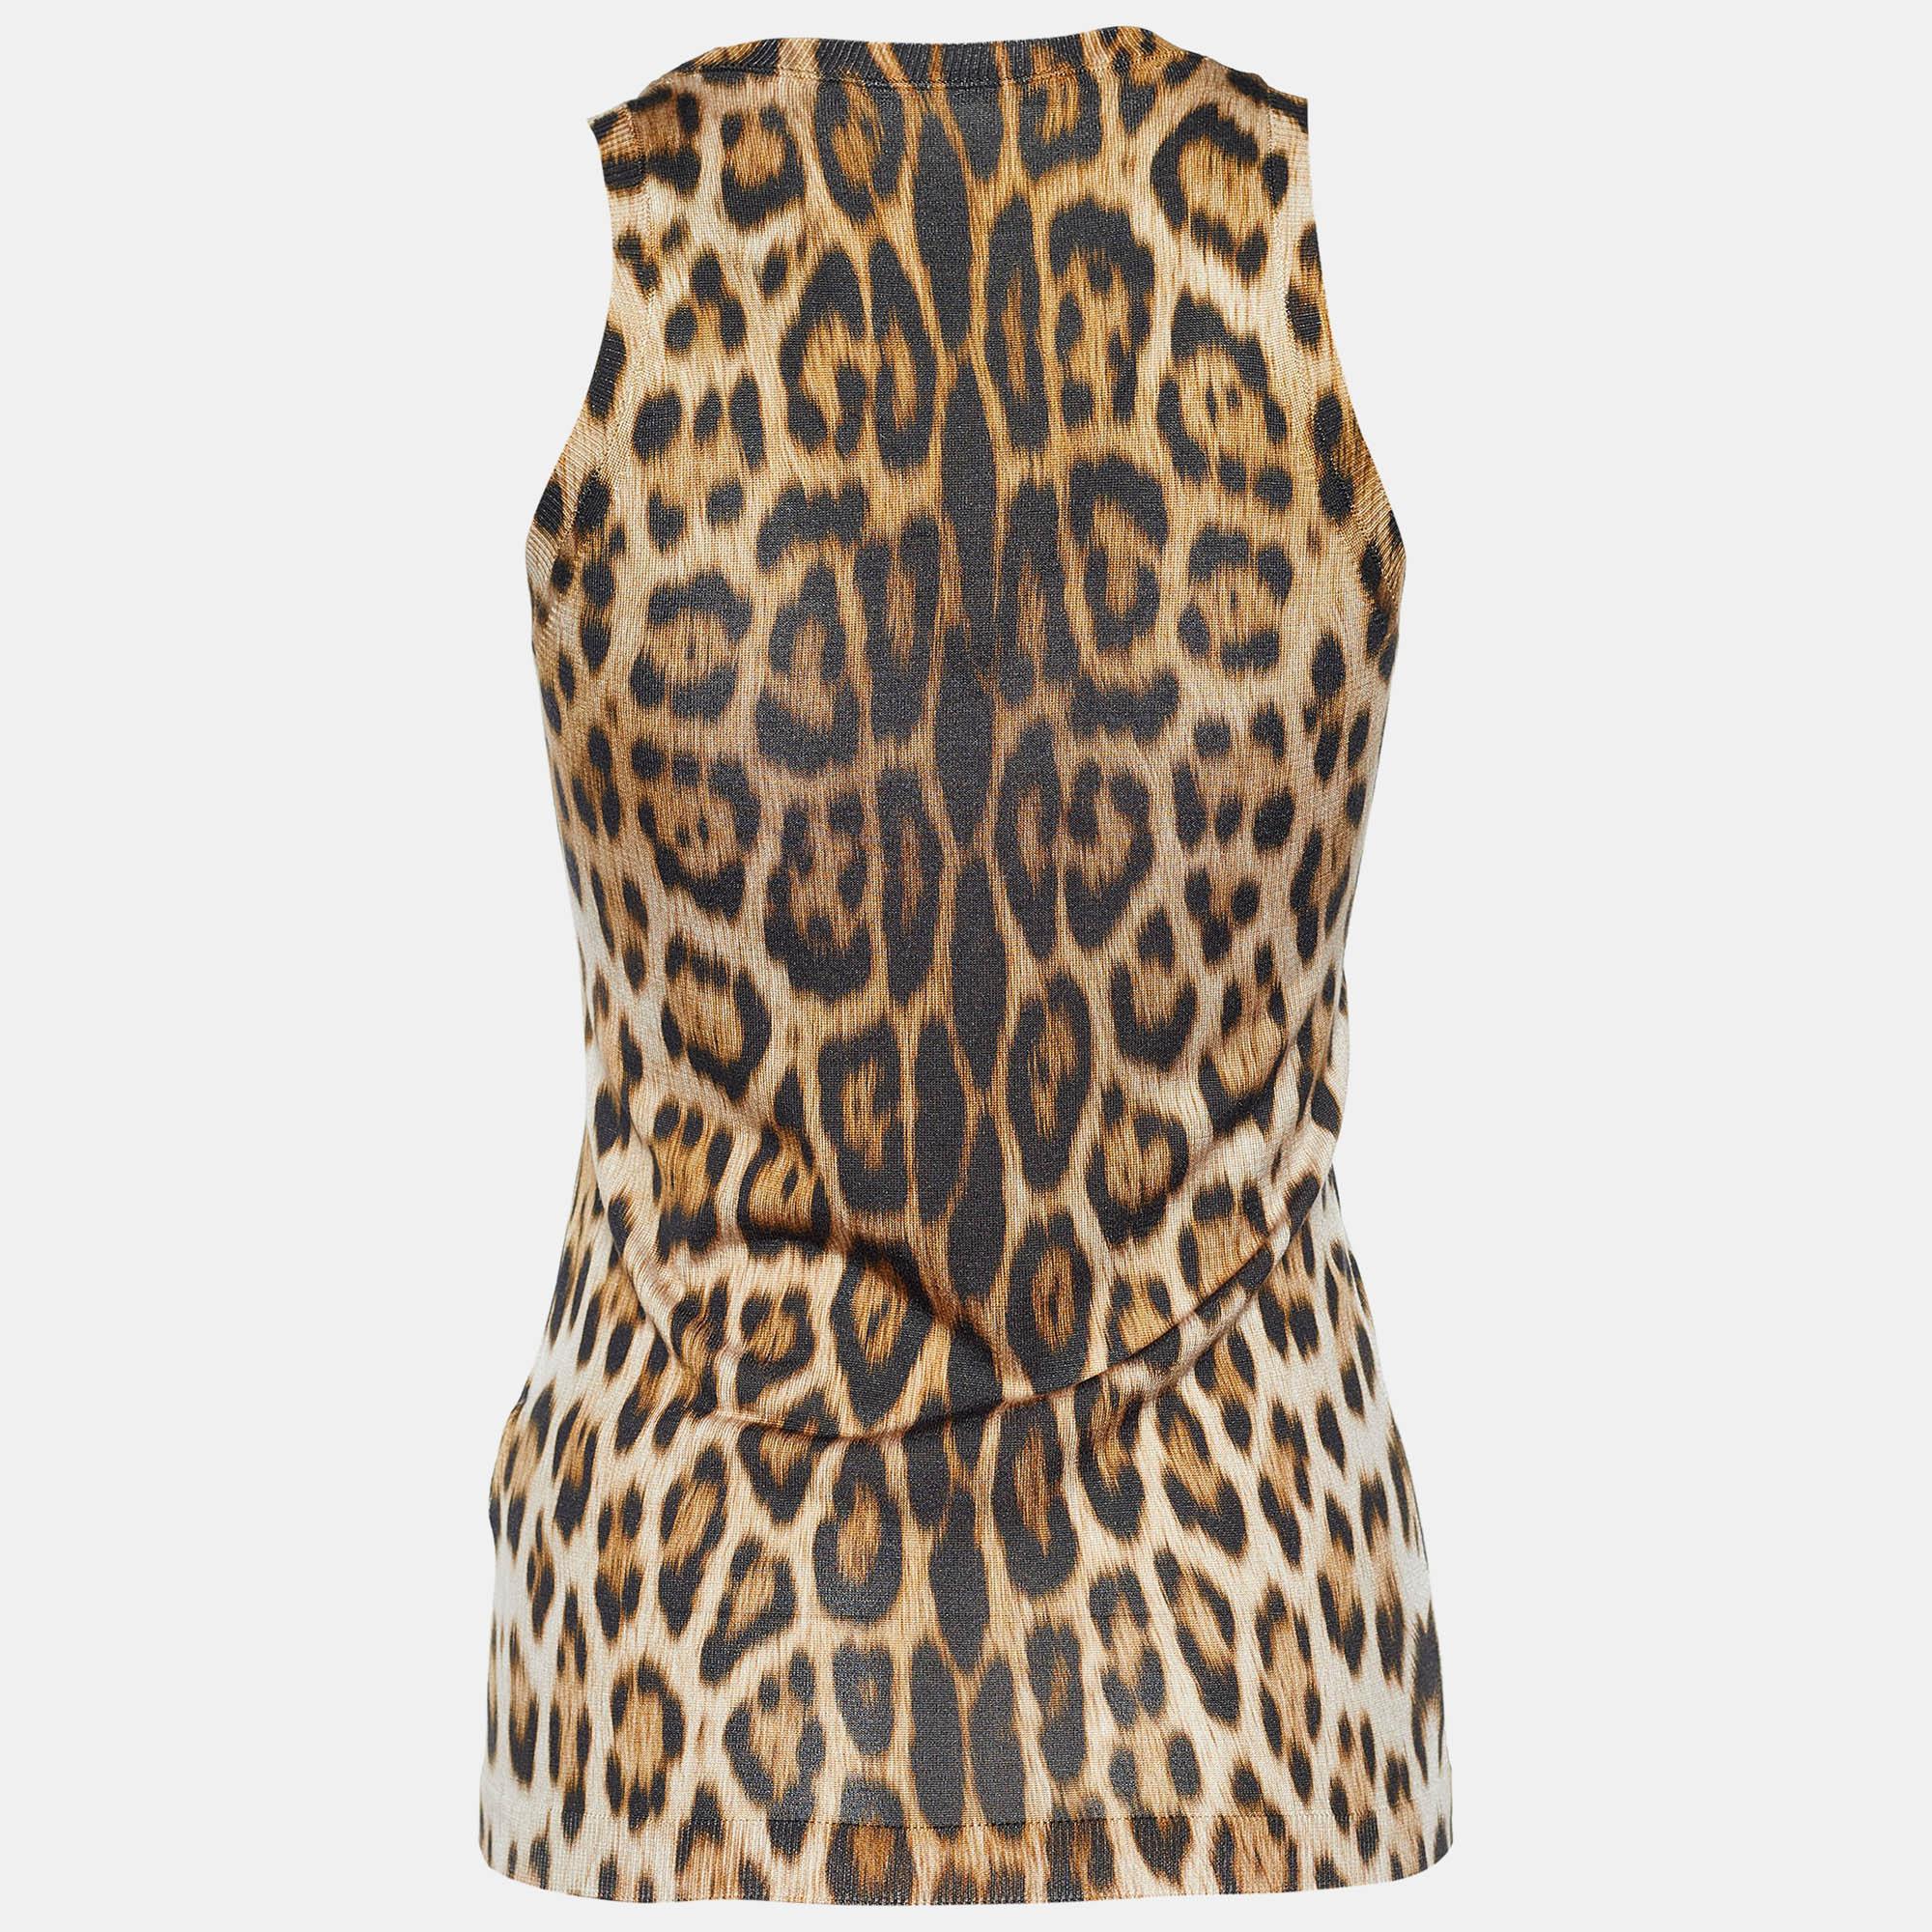 Lounge at home feeling comfy yet stylish in this Roberto Cavalli tank top. It comes in a leopard print. The sleeveless relaxed piece is ideal for daily use.

Includes: Brand Tag, Info Tags